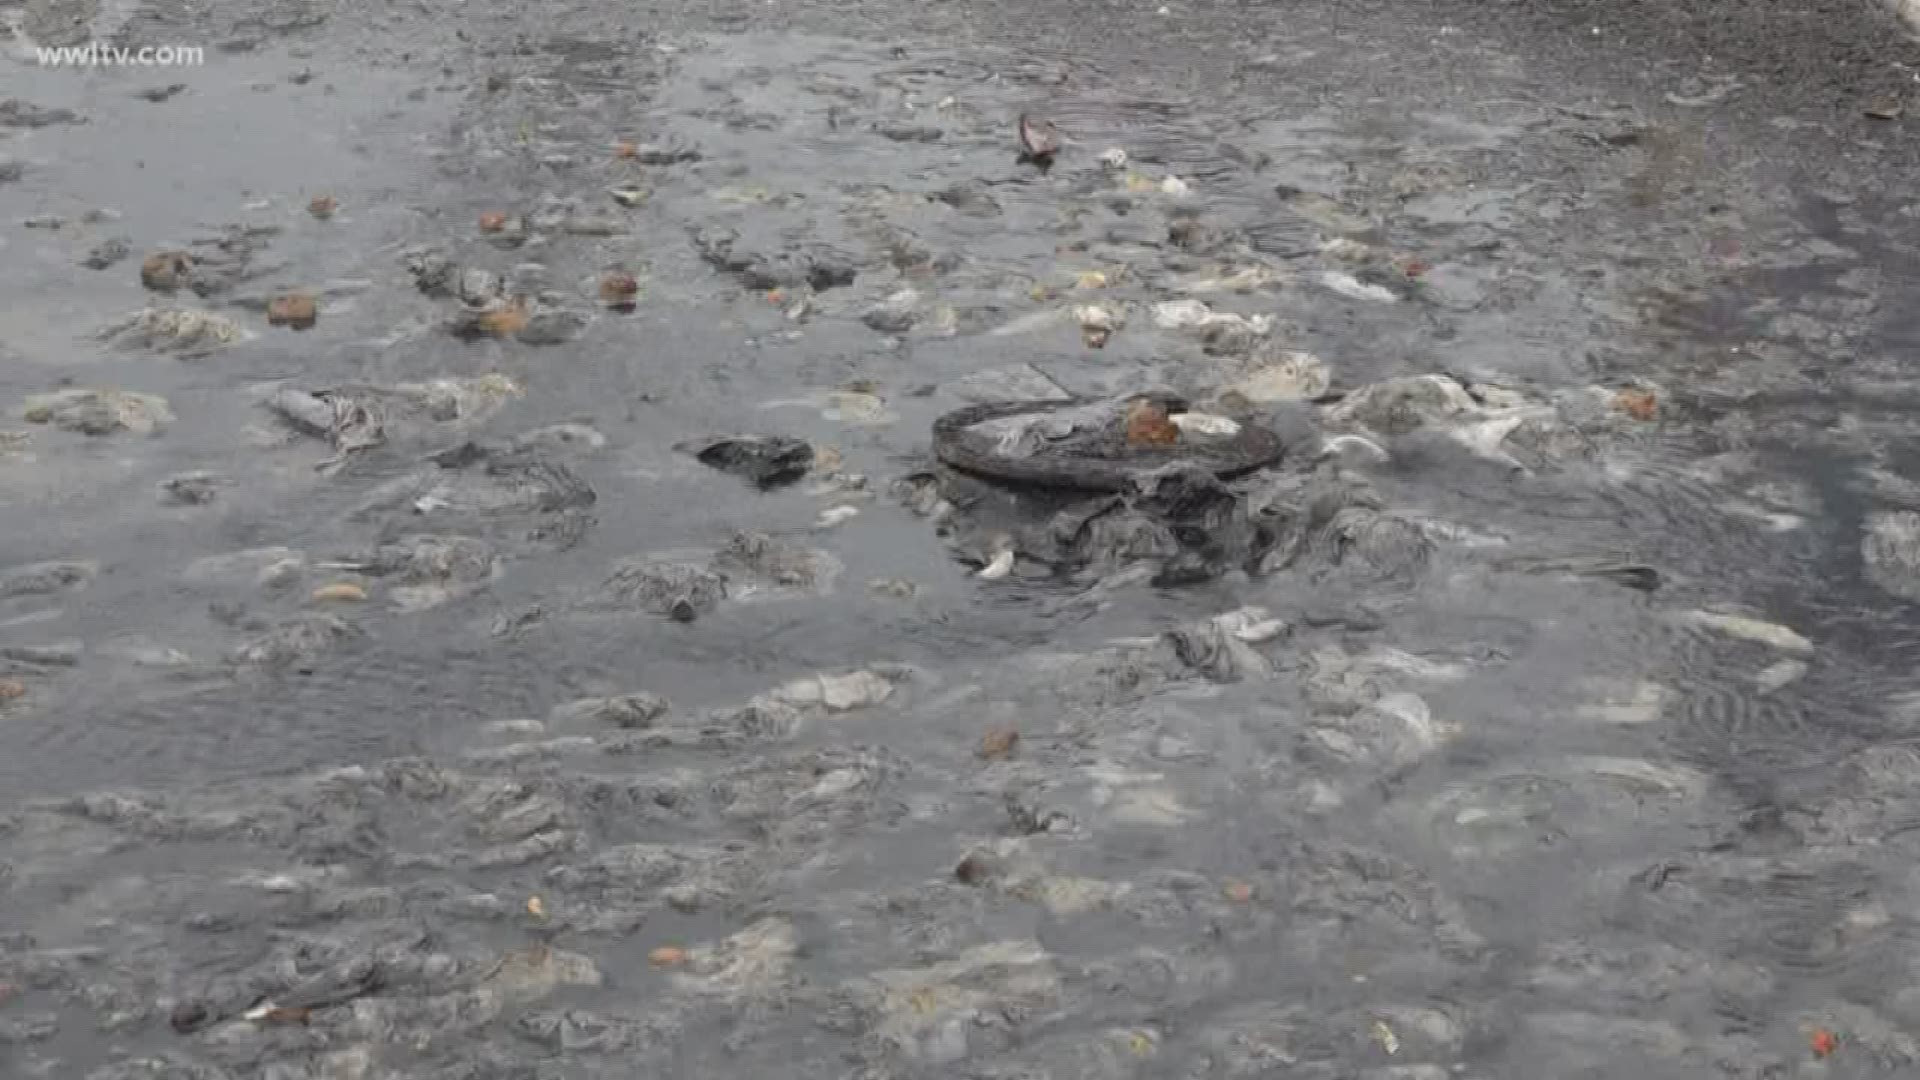 Over the past four days, sewage has been spilling out of manhole covers along Edenborn Avenue in the Fat City part of Metairie. It's left human waste and a terrible smell all over the street.